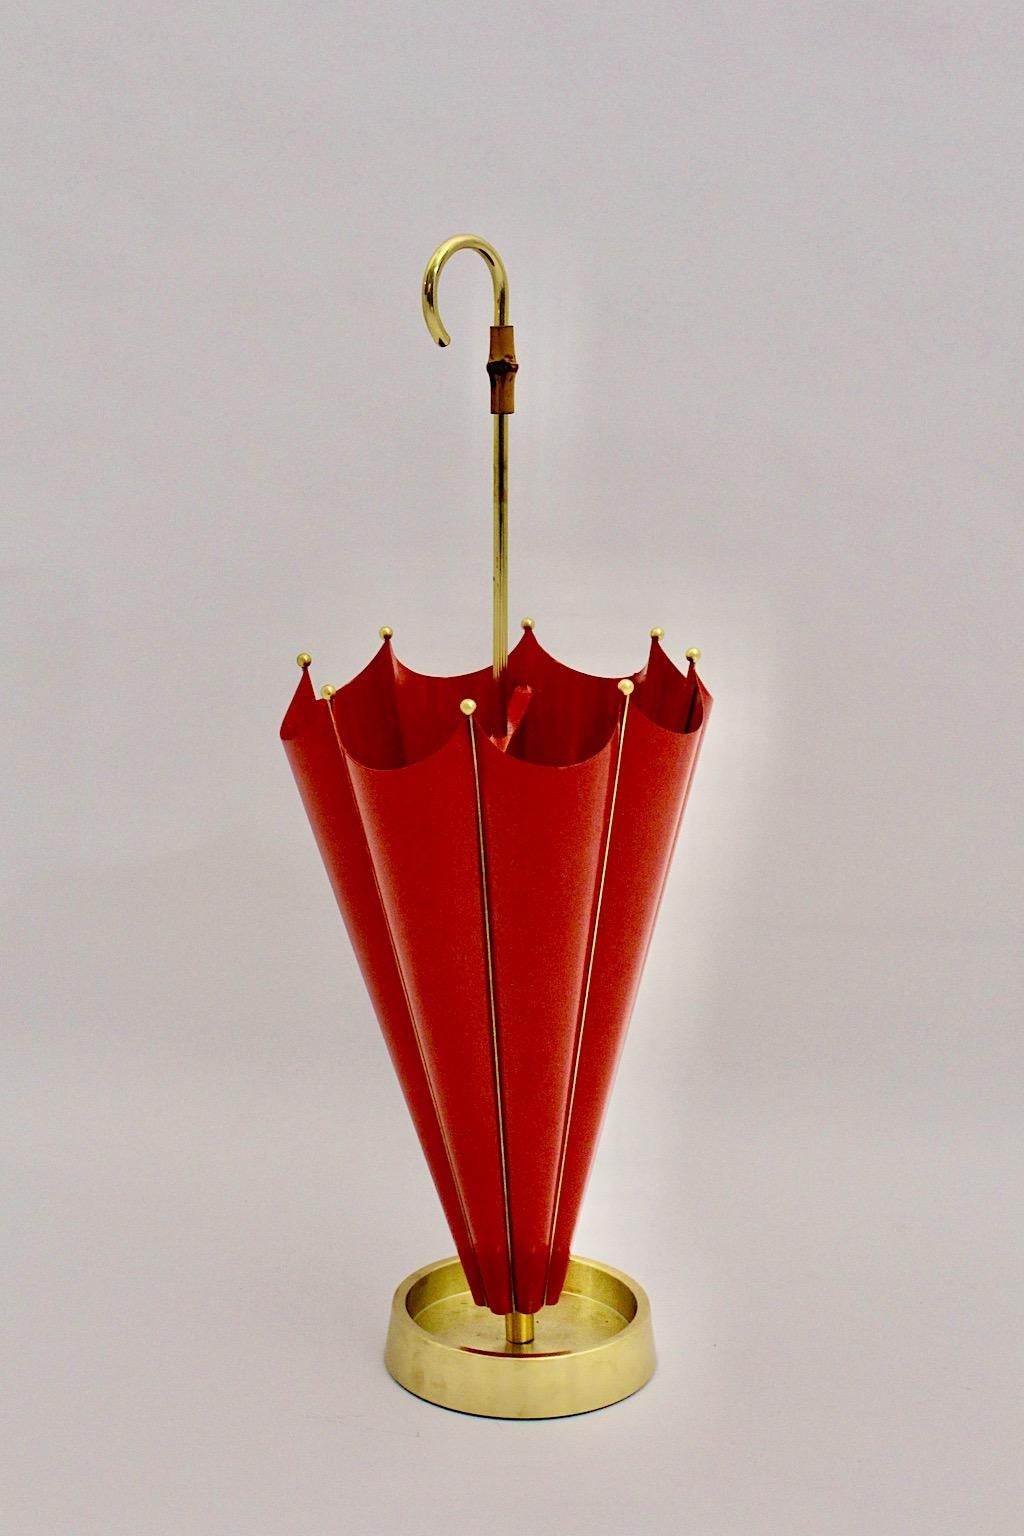 Mid-Century Modern Vintage Red Metal Brass Umbrella Stand Cane Holder 1950 Italy For Sale 2